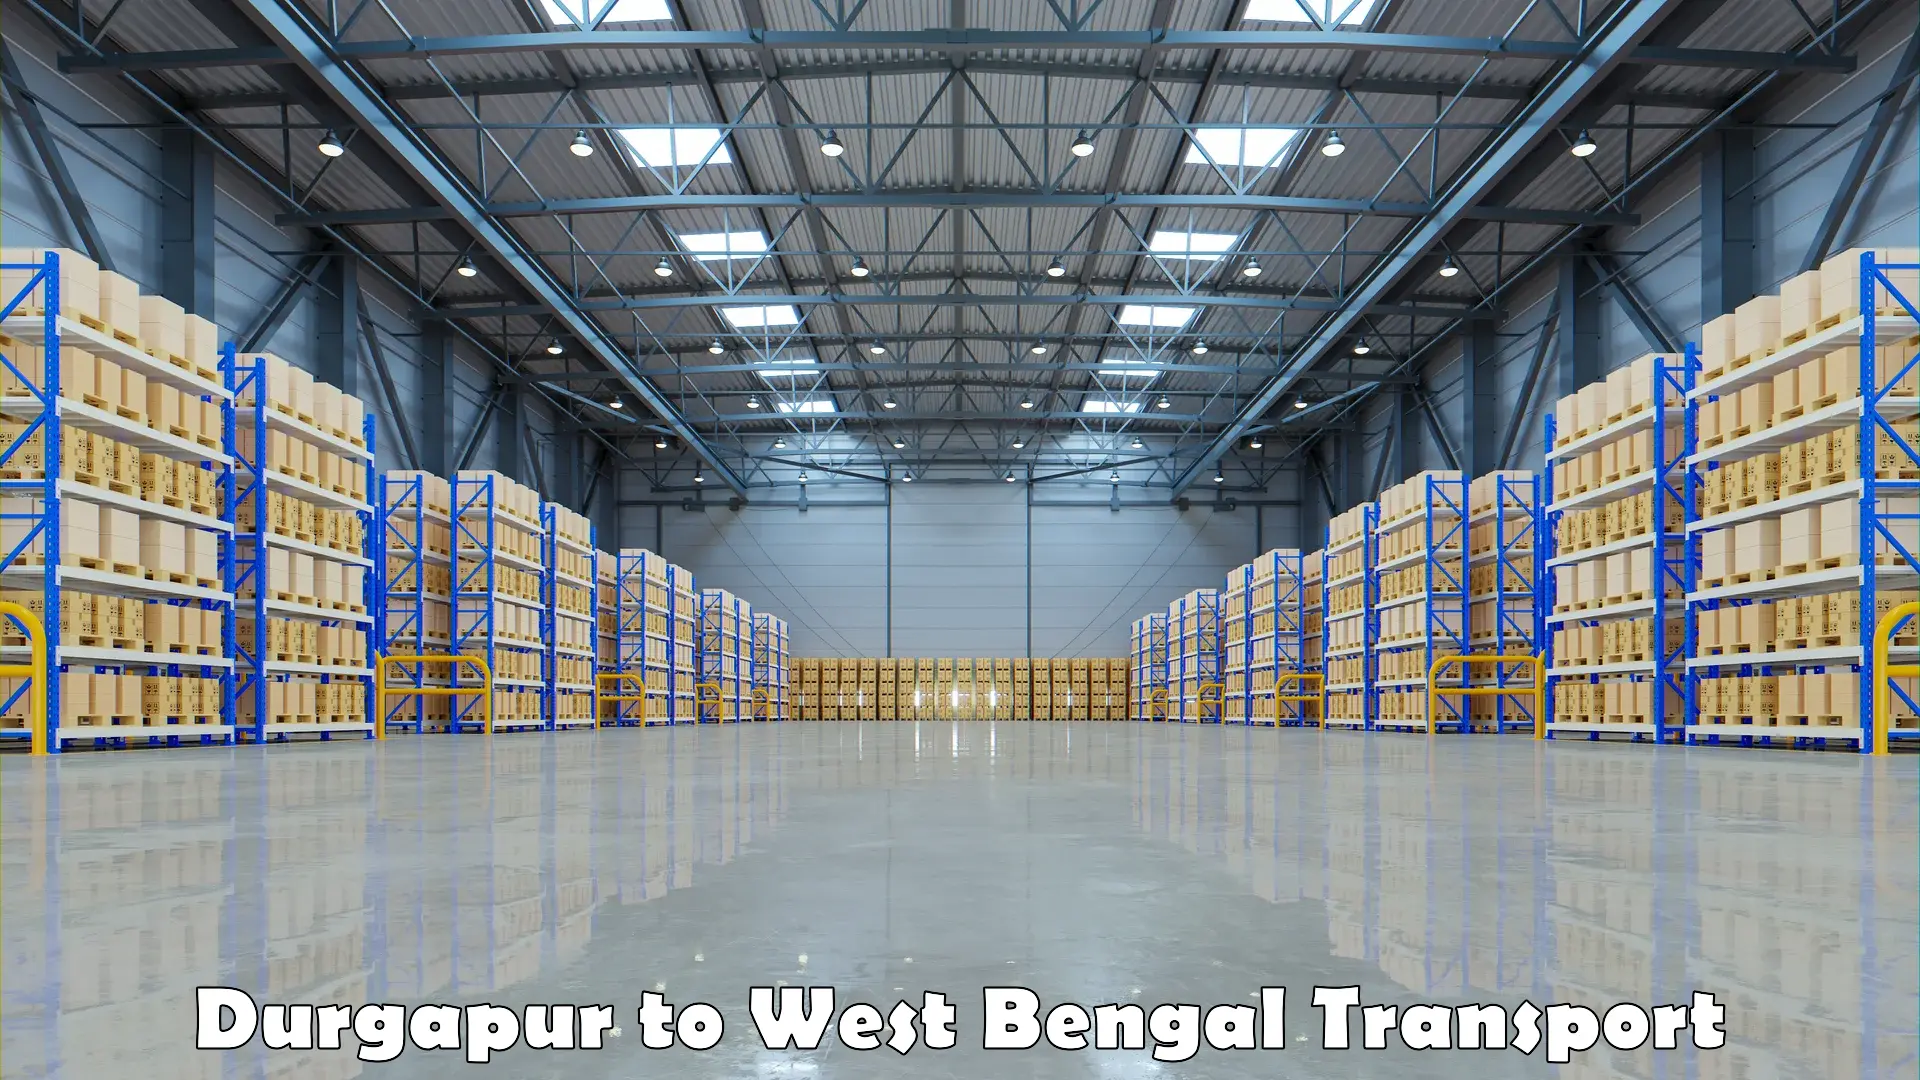 Delivery service Durgapur to West Bengal